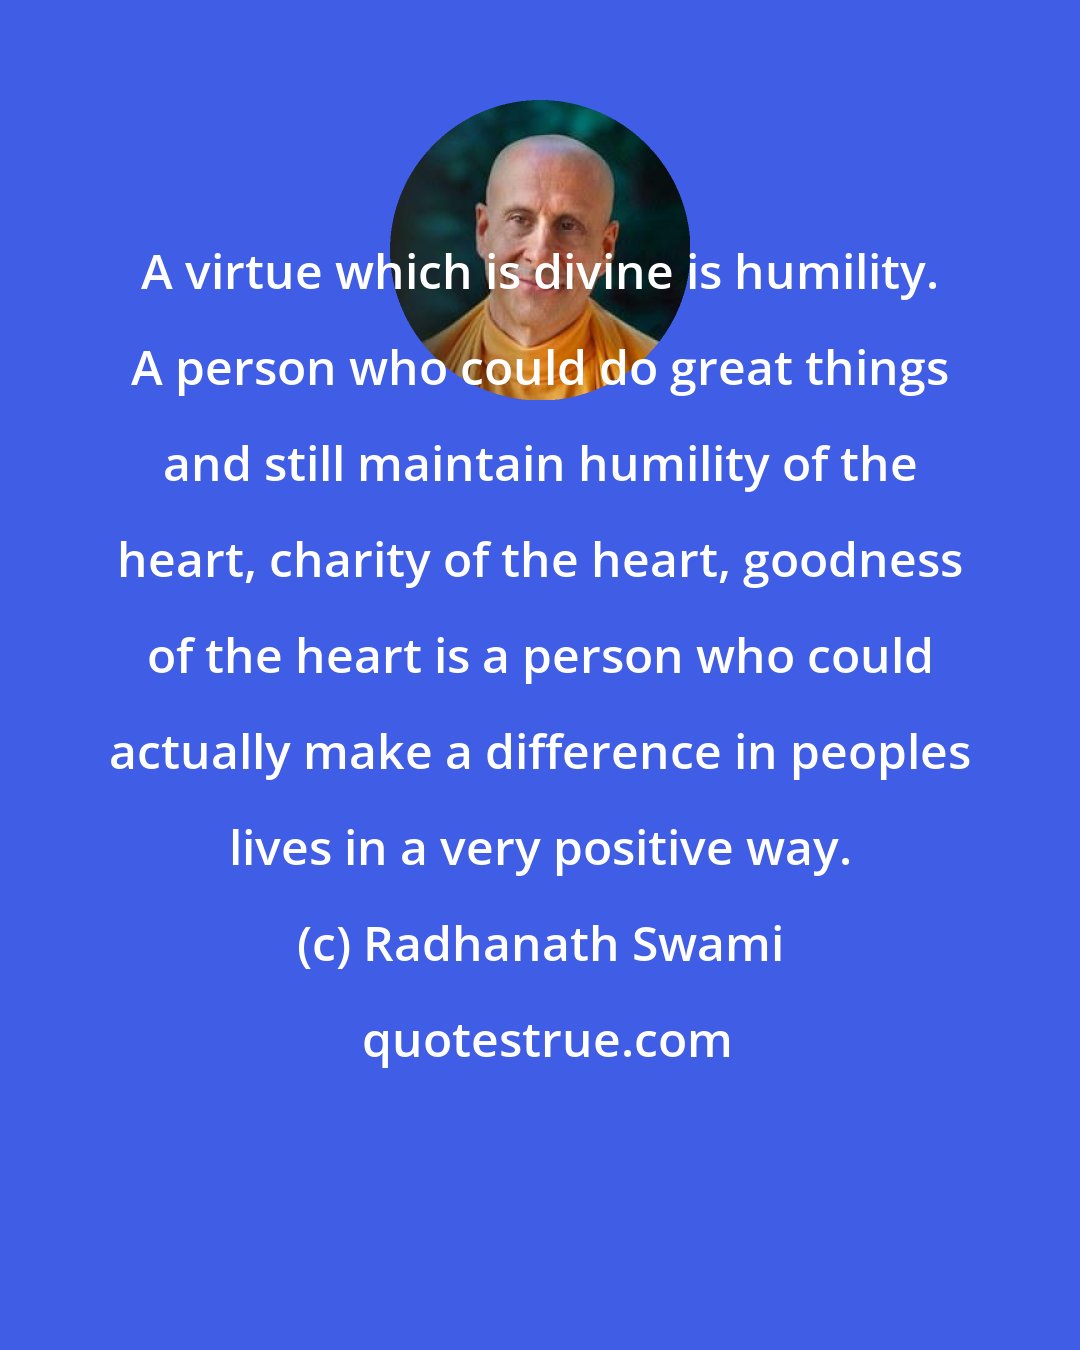 Radhanath Swami: A virtue which is divine is humility. A person who could do great things and still maintain humility of the heart, charity of the heart, goodness of the heart is a person who could actually make a difference in peoples lives in a very positive way.